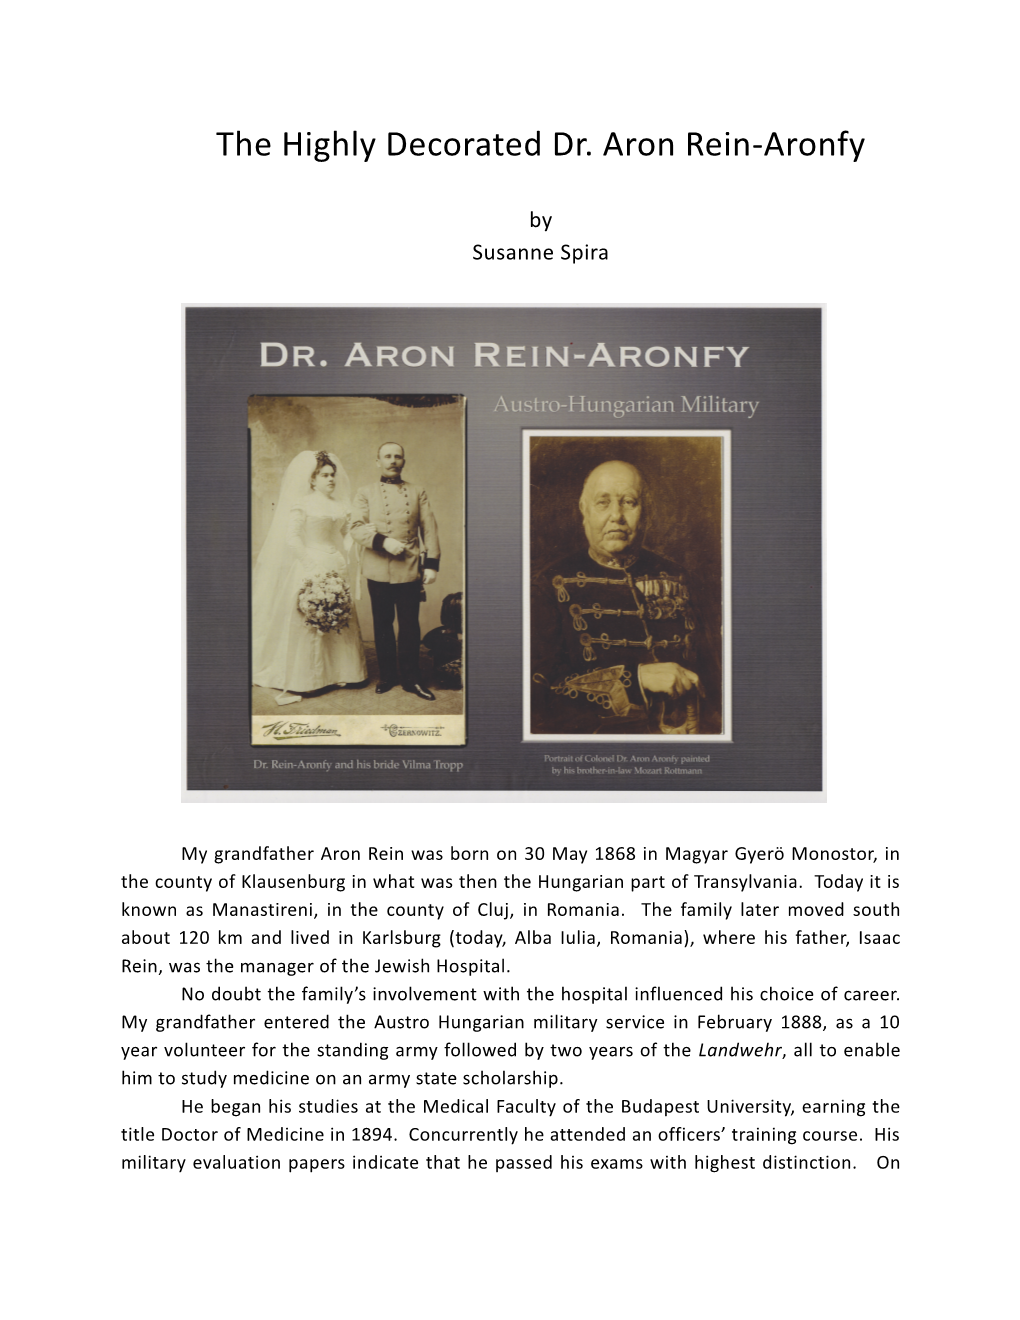 The Highly Decorated Dr. Aron Rein-Aronfy